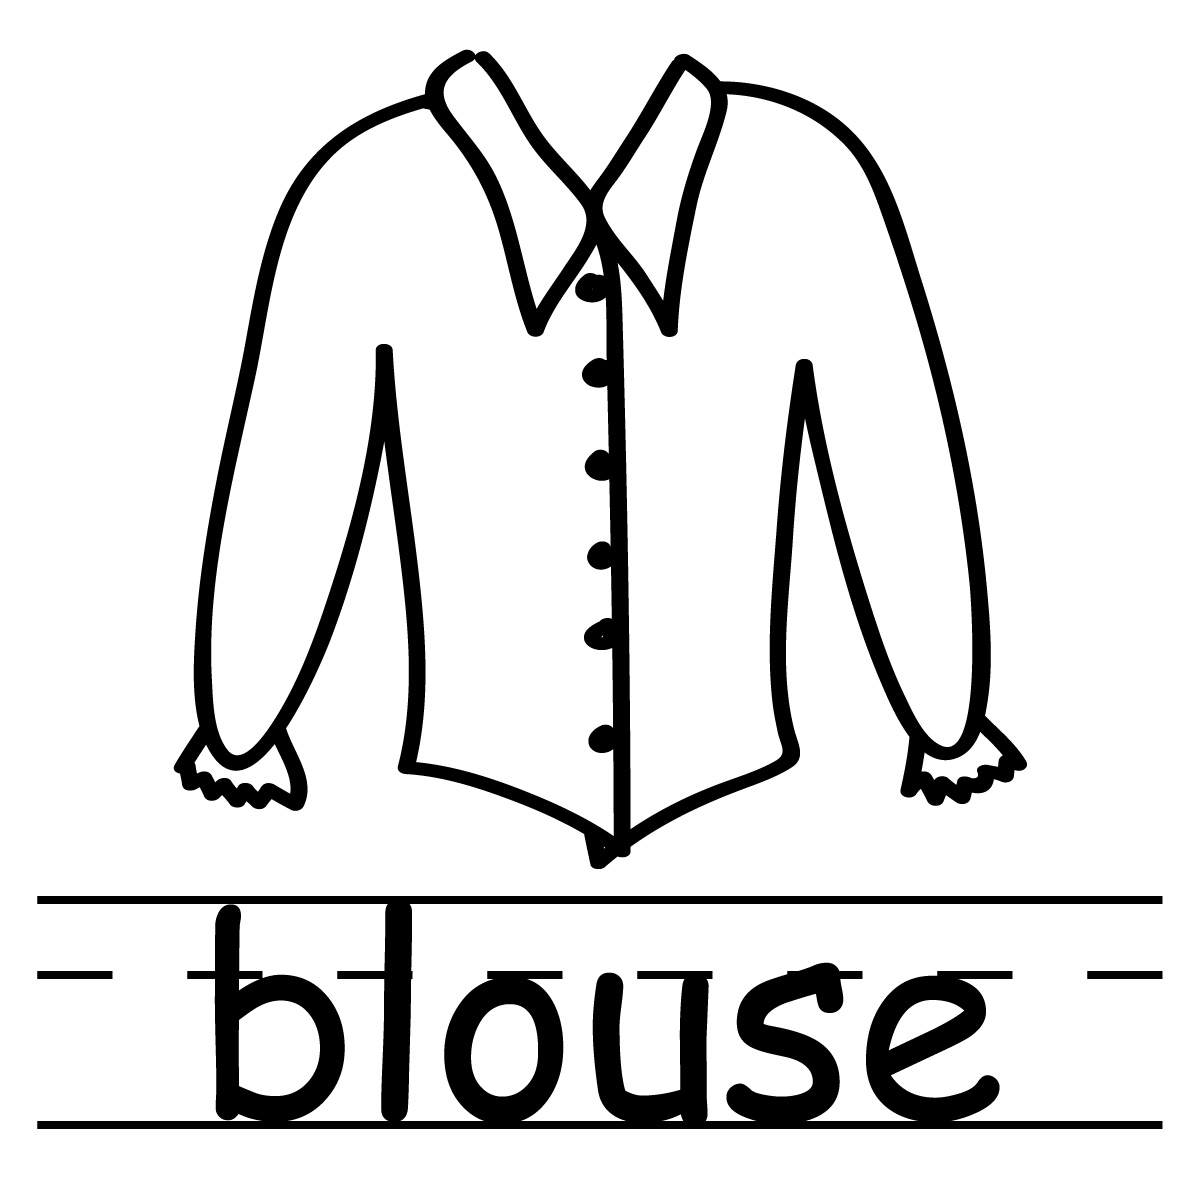 Clothes Clipart Black And White   Clipart Panda   Free Clipart Images